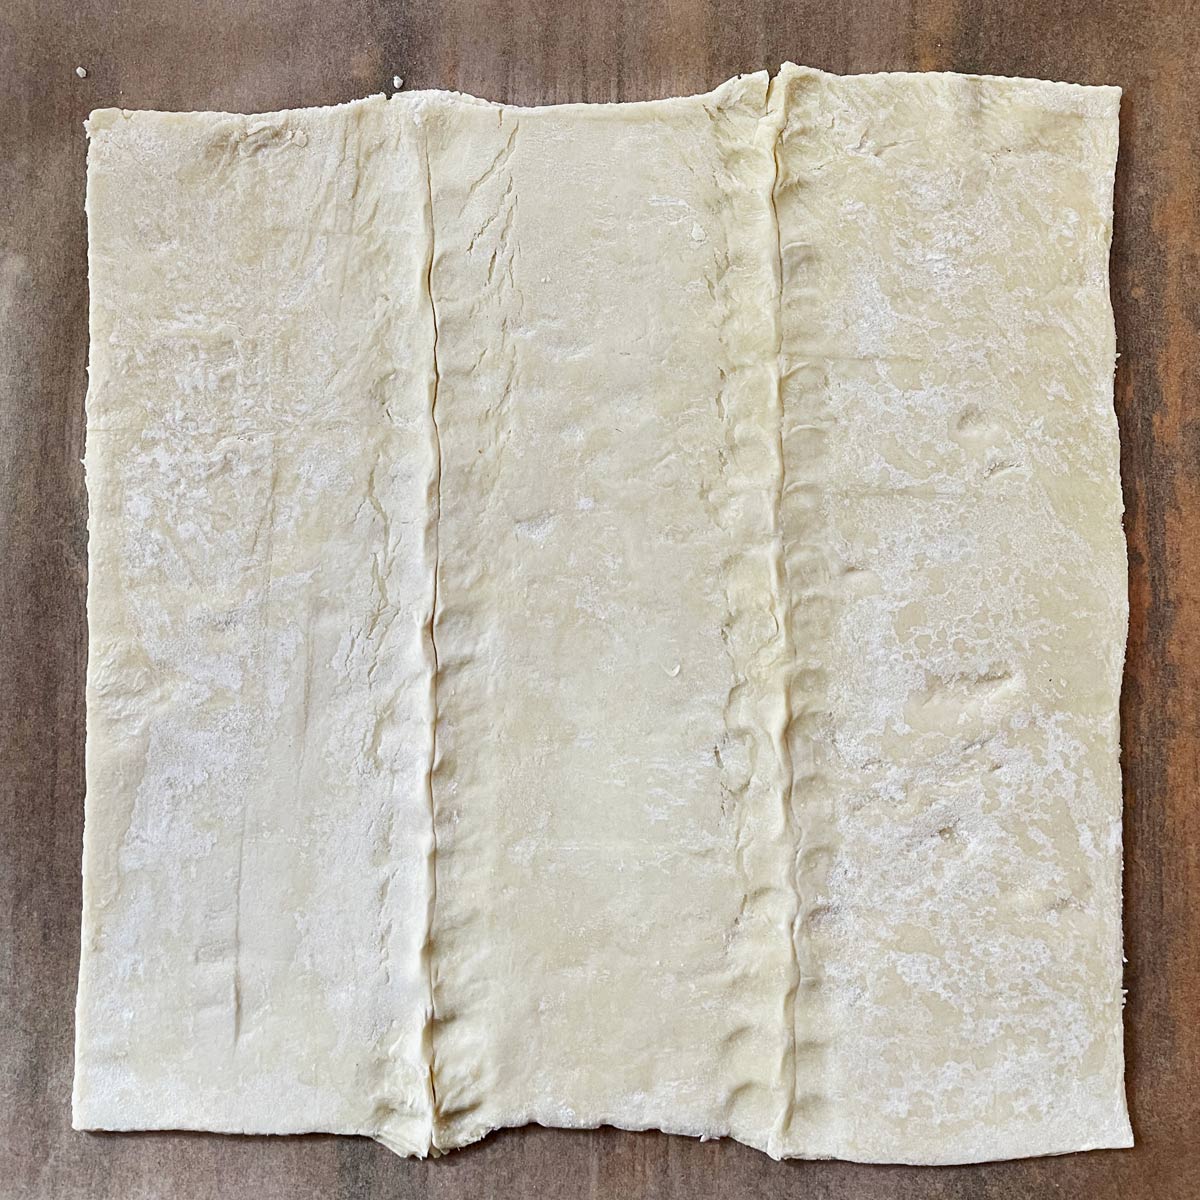 Puff pastry opens with seams pinched.